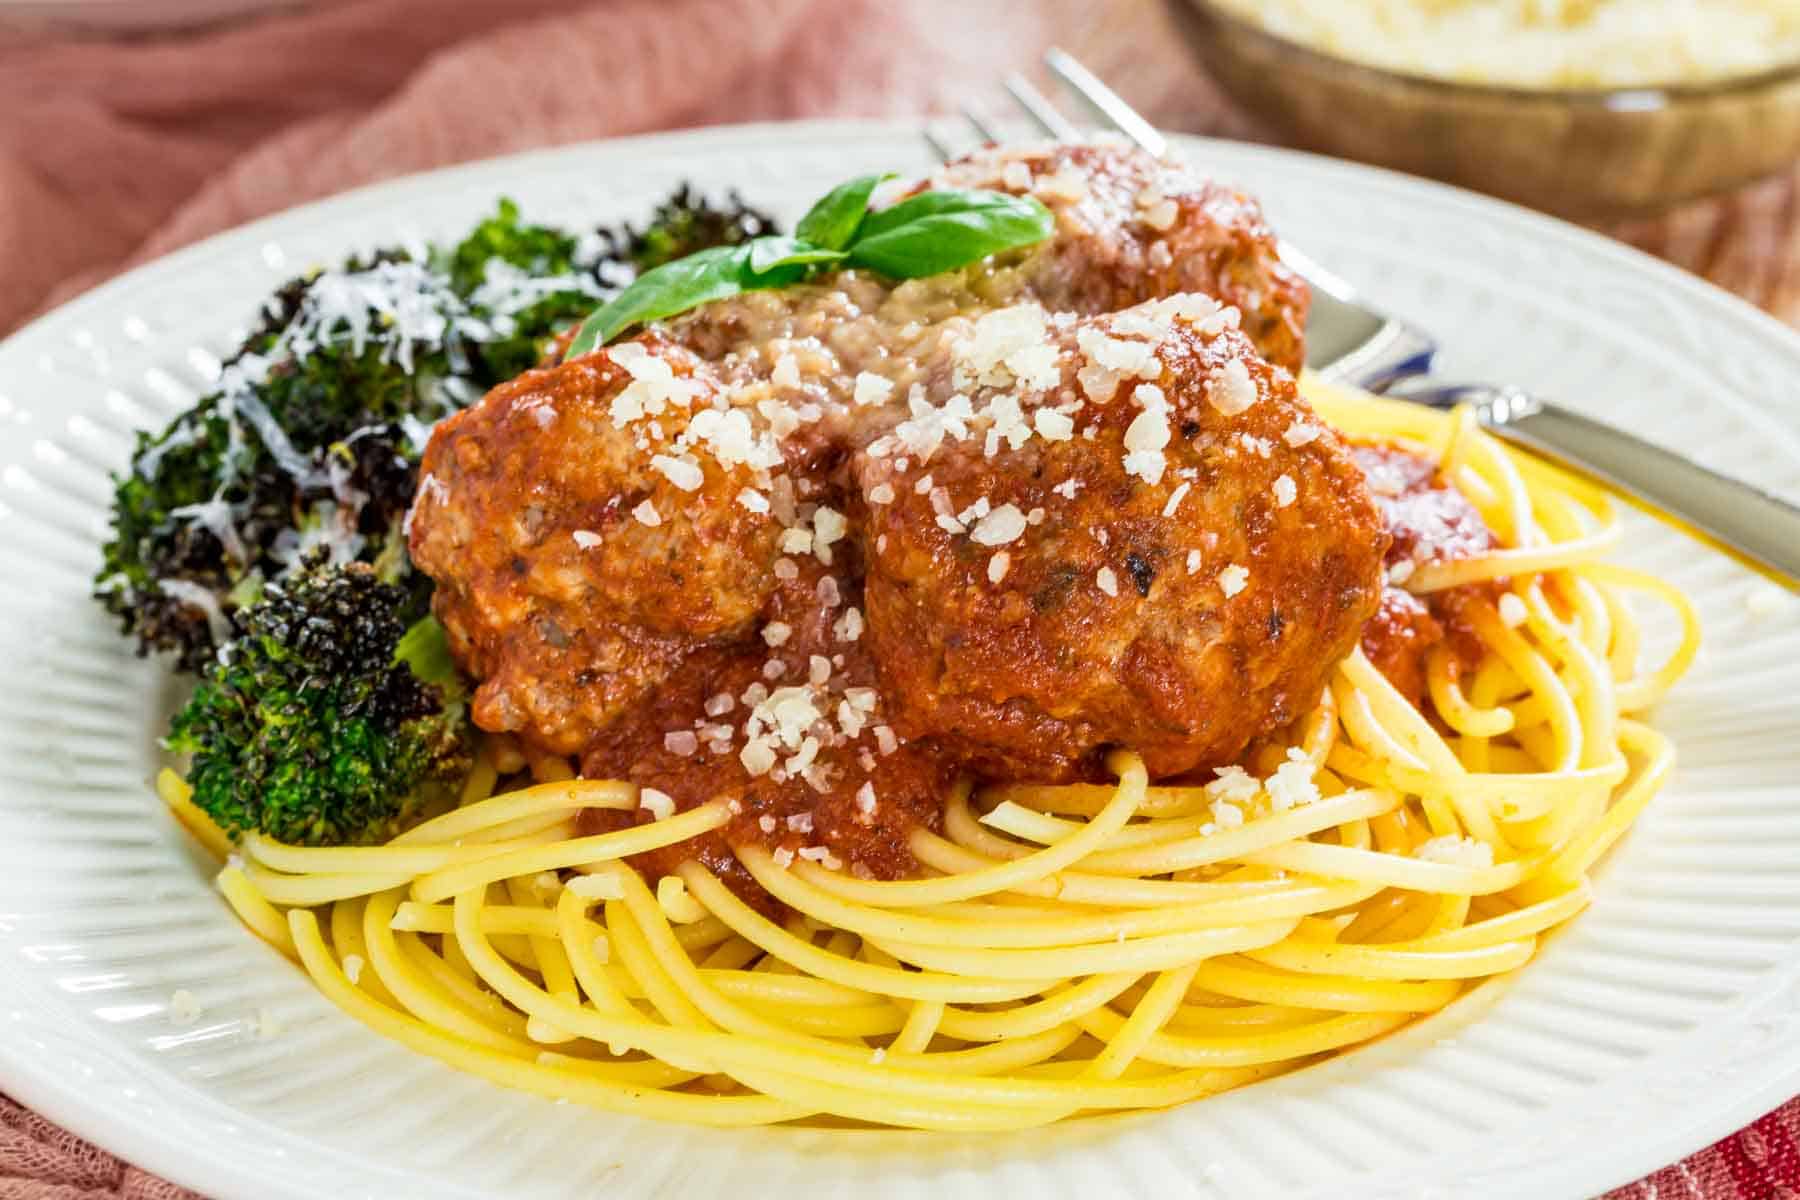 A plateful of spaghetti and gluten-free Italian meatballs with a side of roasted broccoli, topped with parmesan next to a fork.